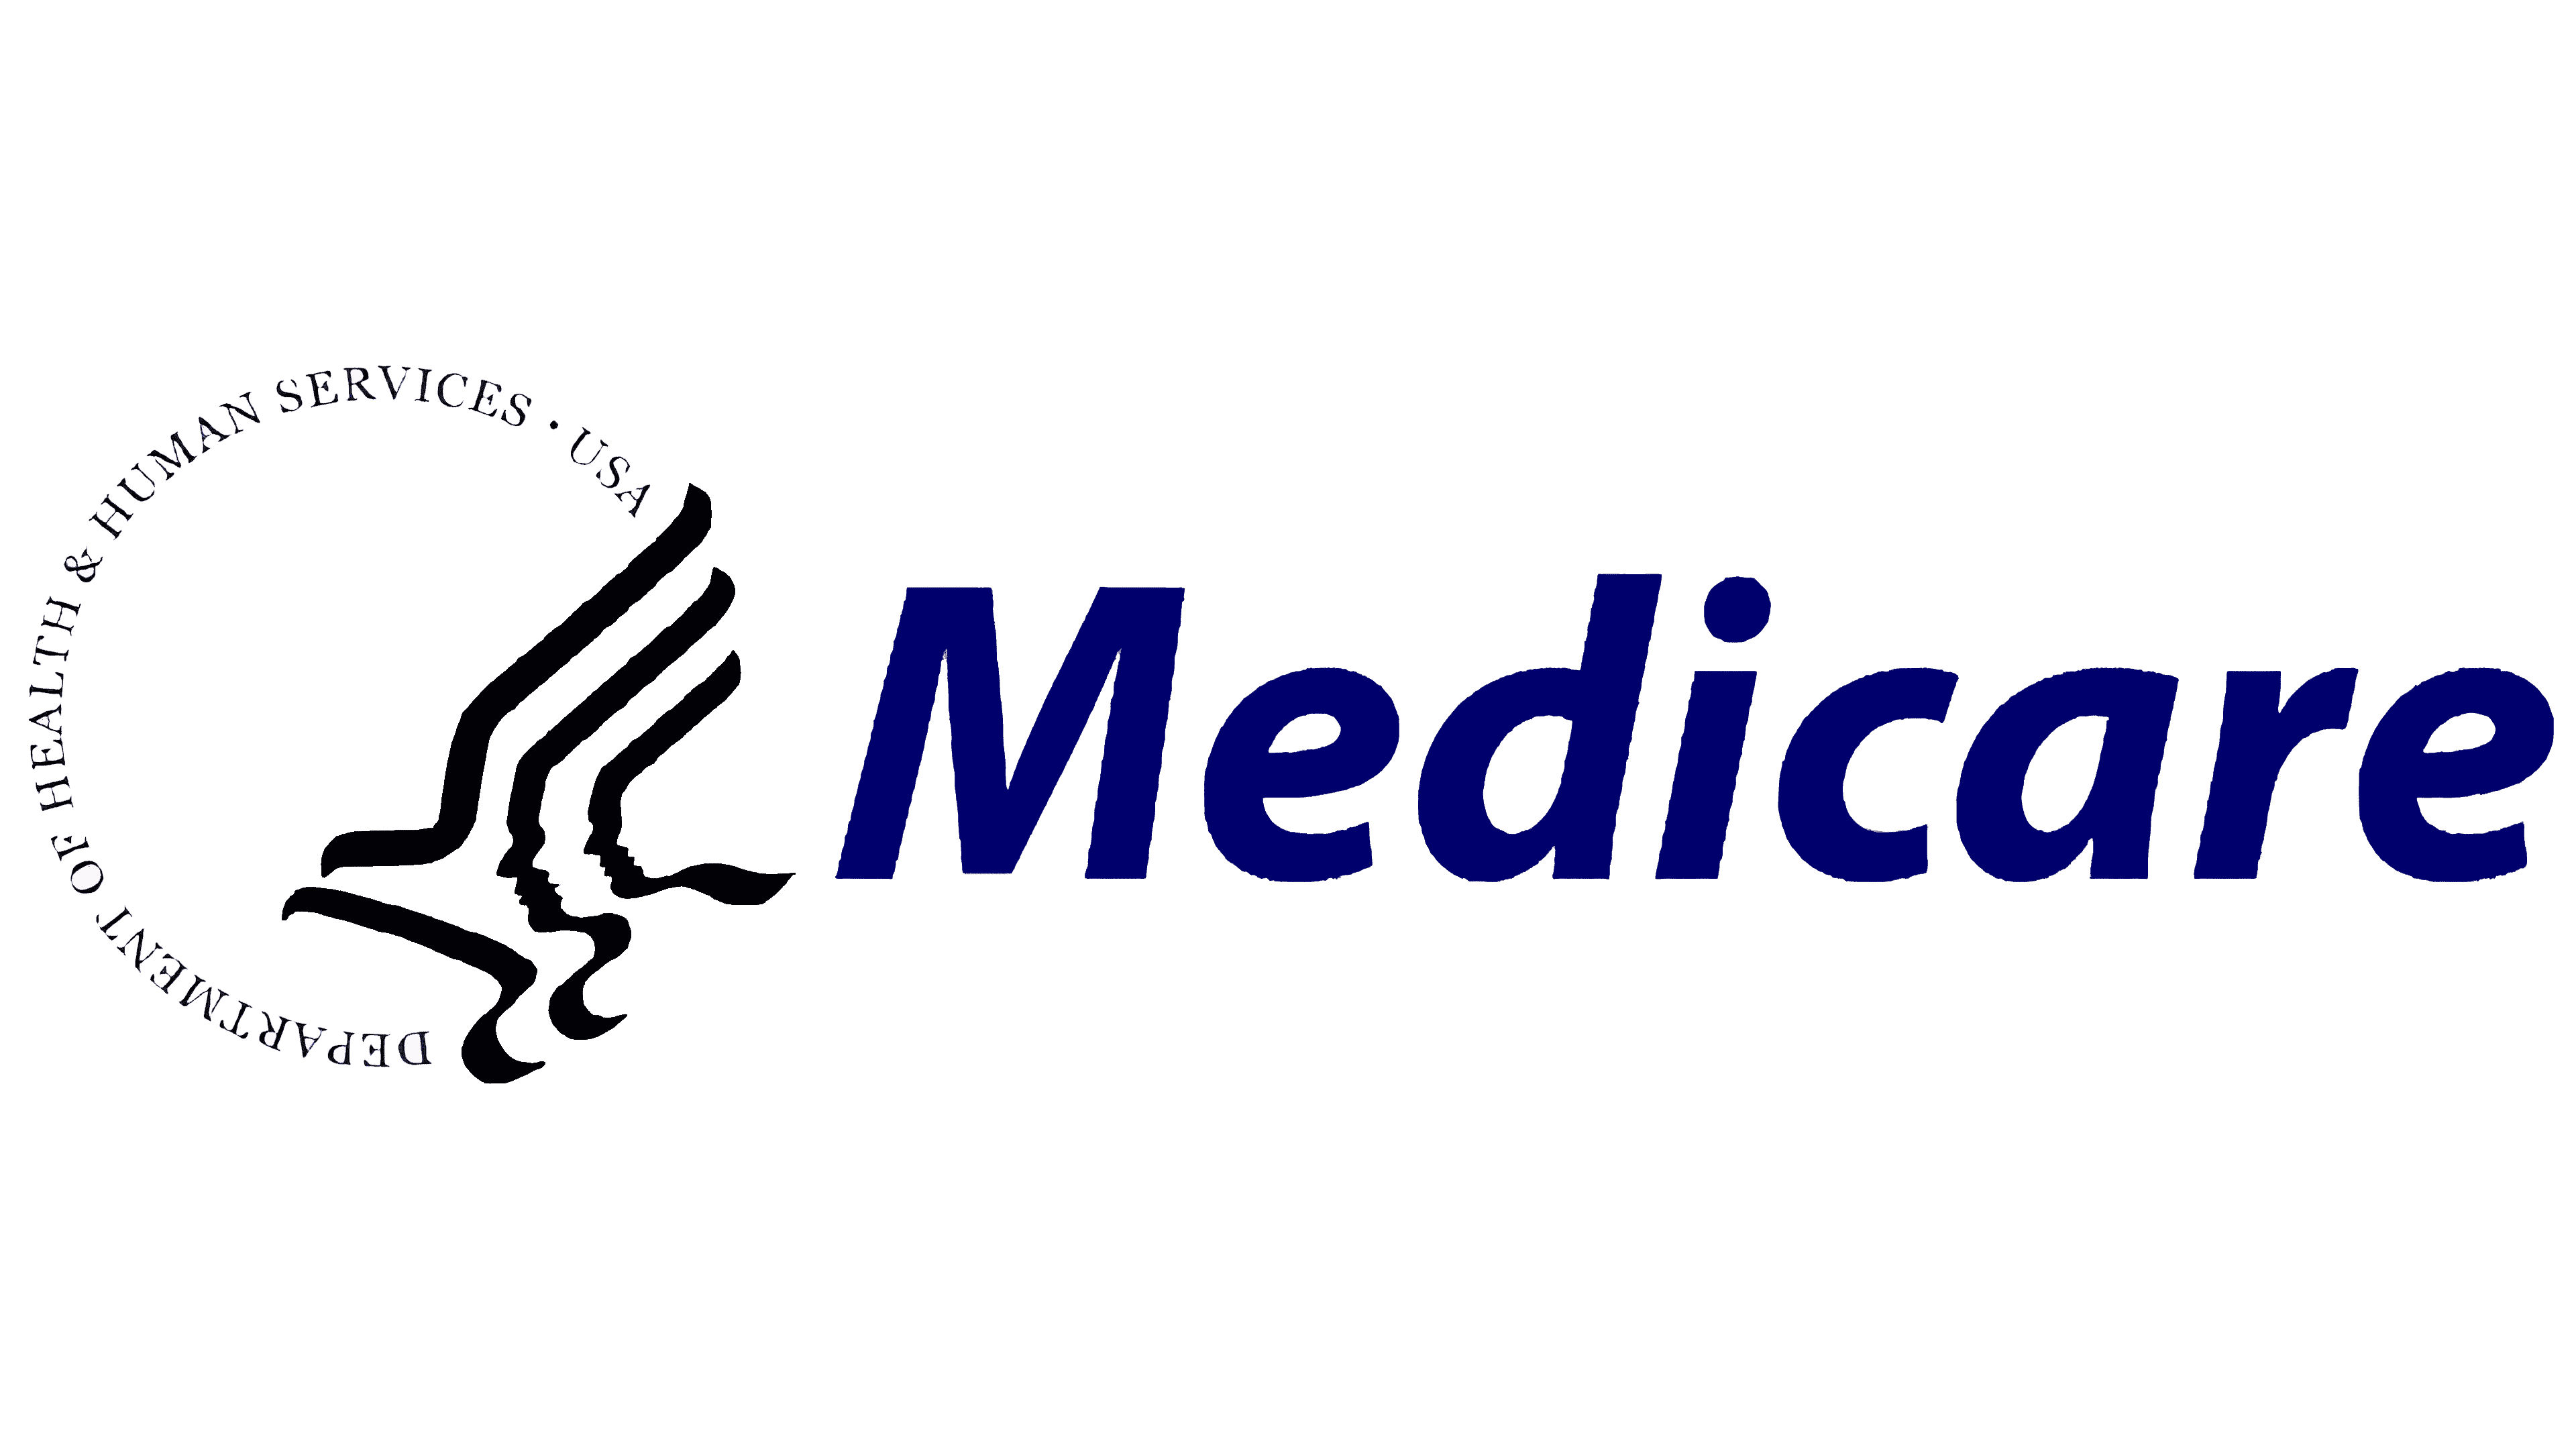 Center for medicare and medicaid services logo emblem conduent medicaid new mexico